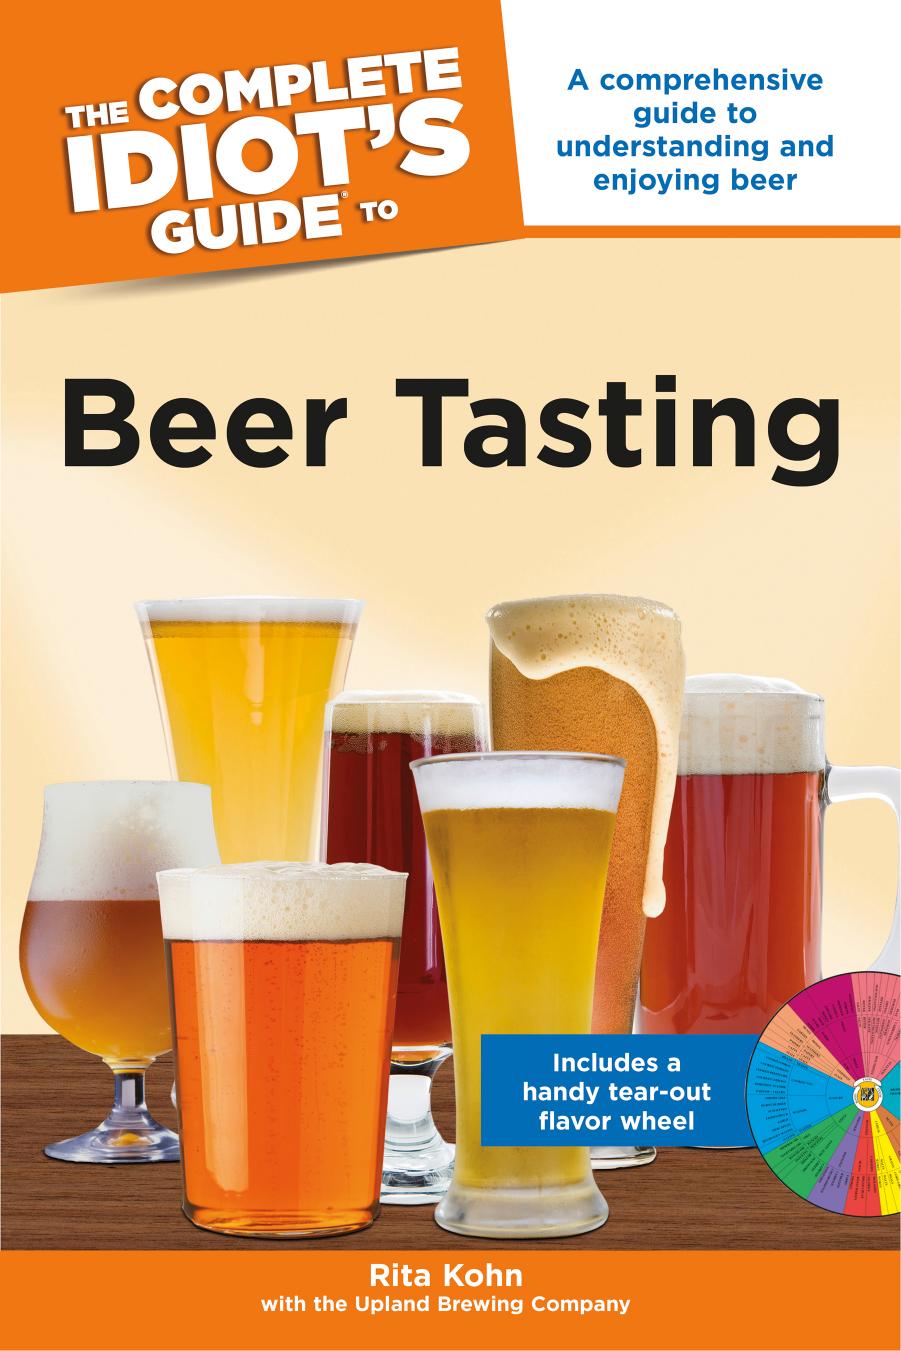 The Complete Idiot's Guide to Beer Tasting by Rita Kohn